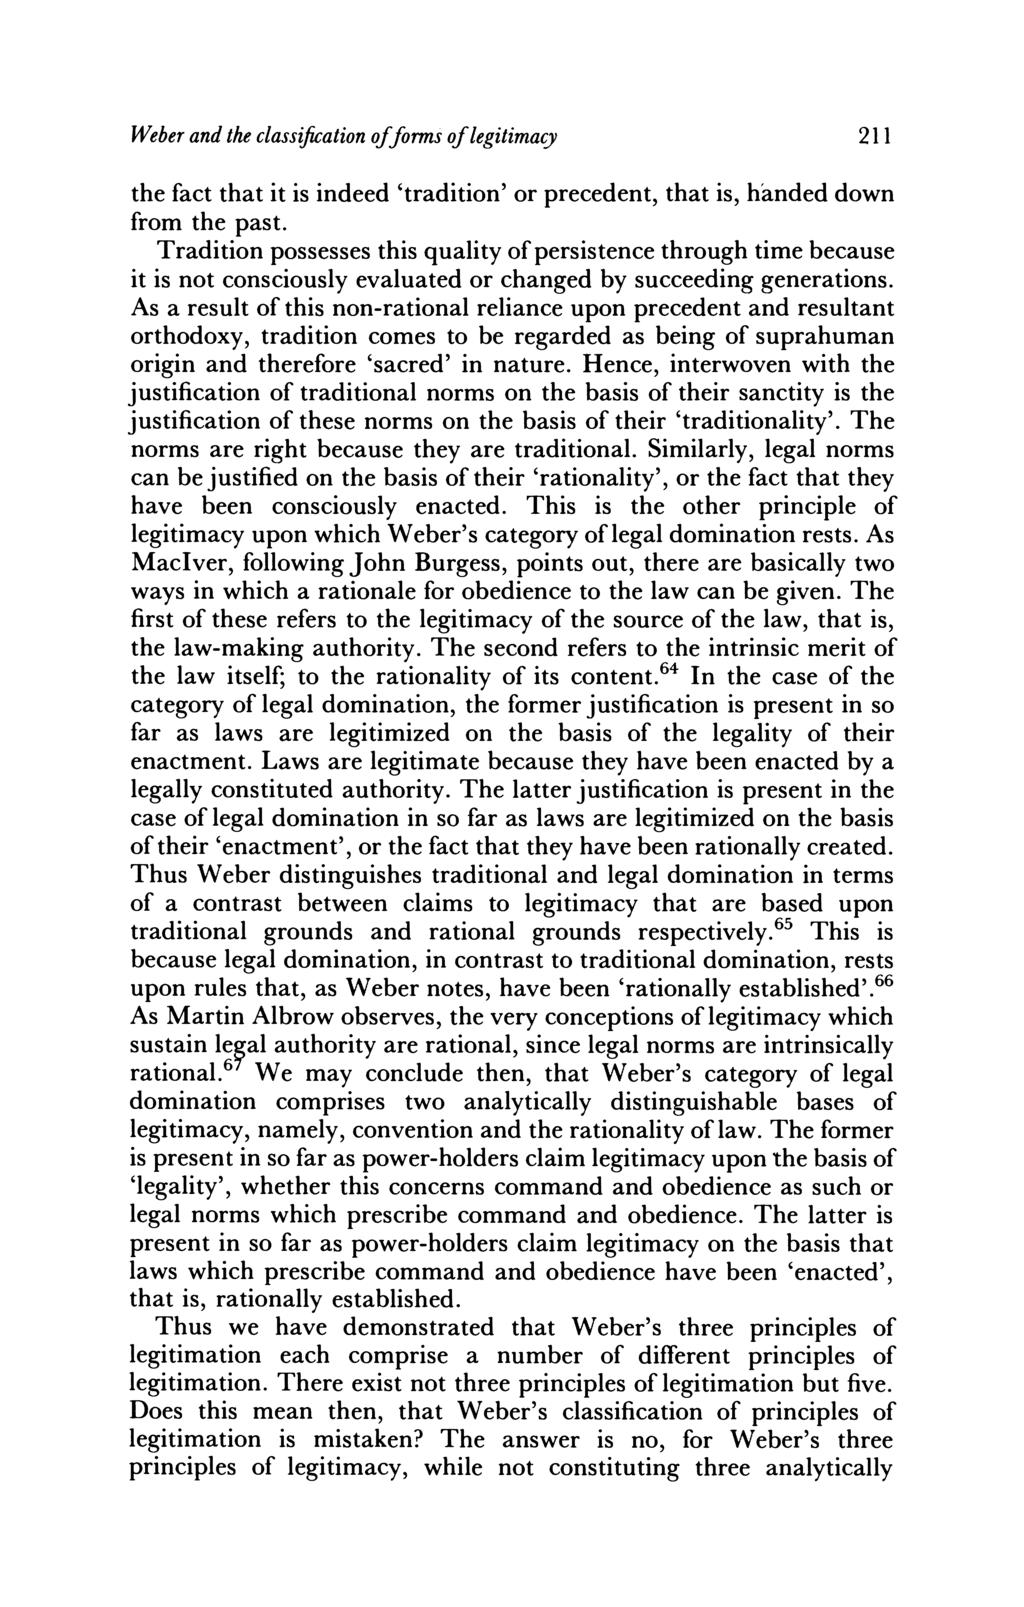 Weber and the classification offorms of legitimacw the fact that it is indeed 'tradition' or precedent, that is, handed down from the past.